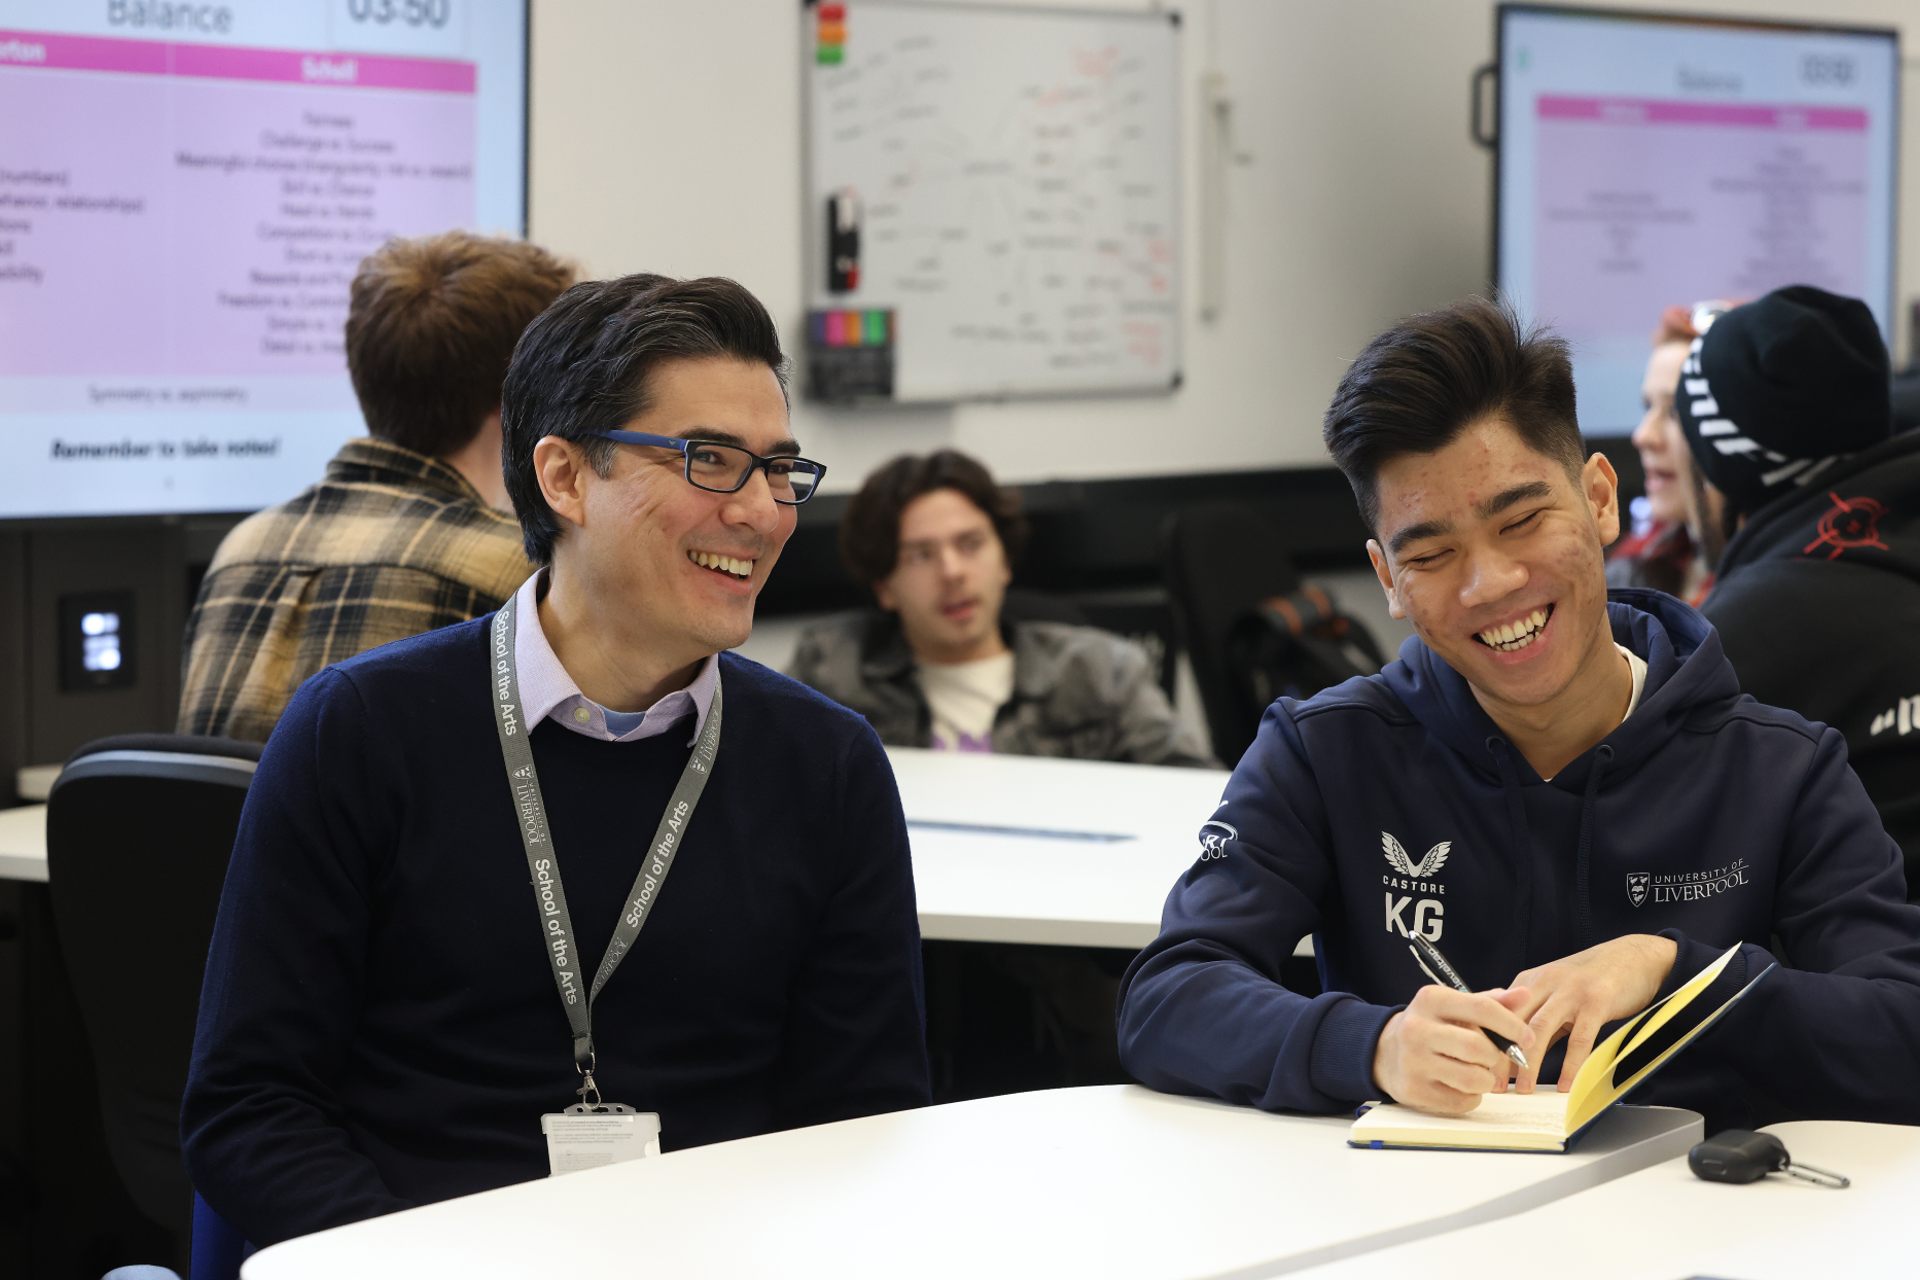 A student and member of staff sitting together, talking and smiling.